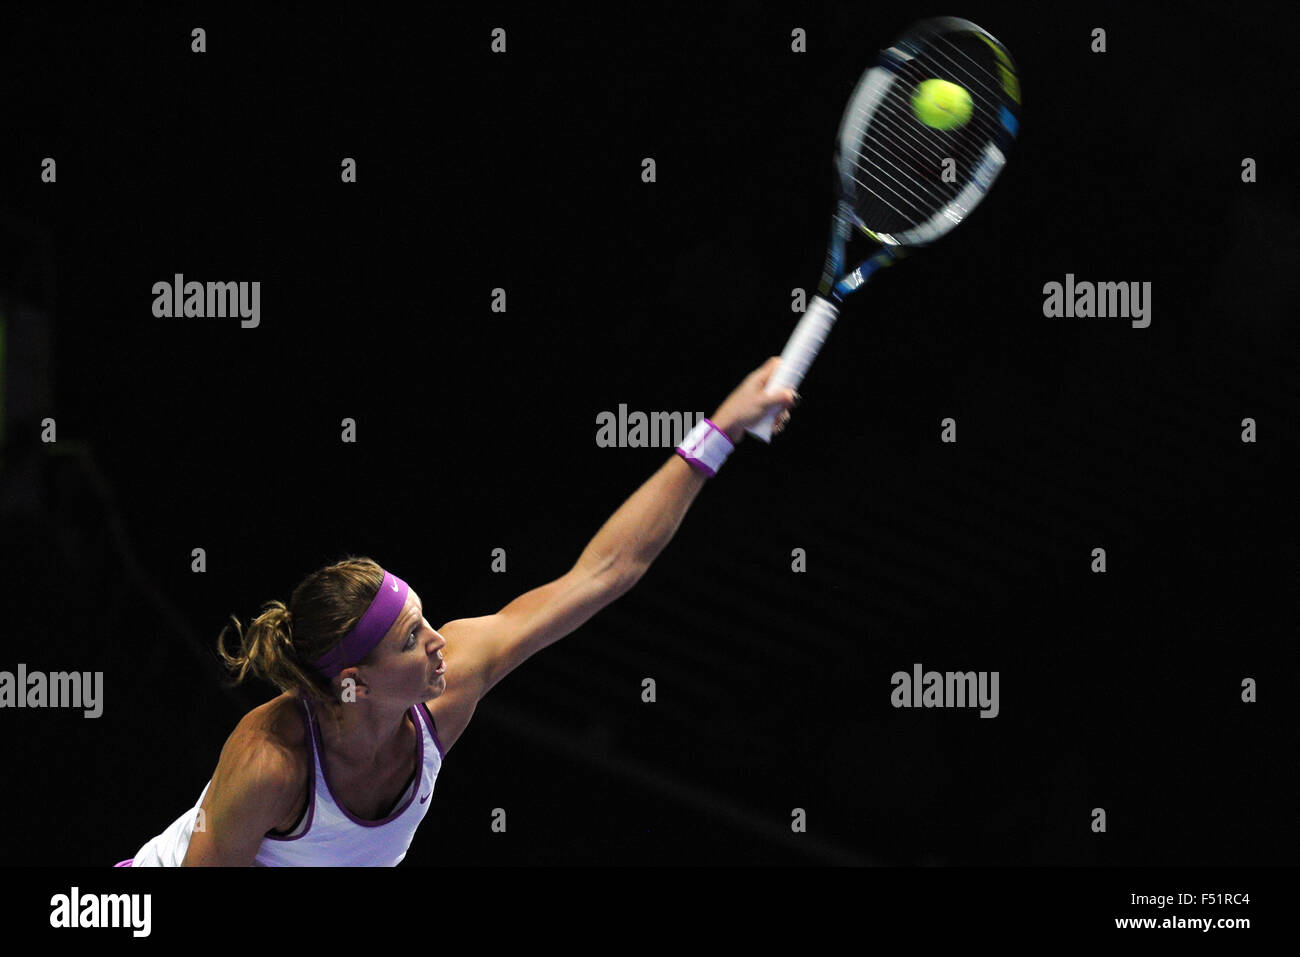 Singapore. 26th Oct, 2015. Lucie Safarova of the Czech Republic serves during the WTA Finals round robin match against Garbine Muguruza of Spain at Singapore Indoor Stadium in Singapore, Oct. 26, 2015. Lucie Safarova lost 0-2. Credit:  Then Chih Wey/Xinhua/Alamy Live News Stock Photo